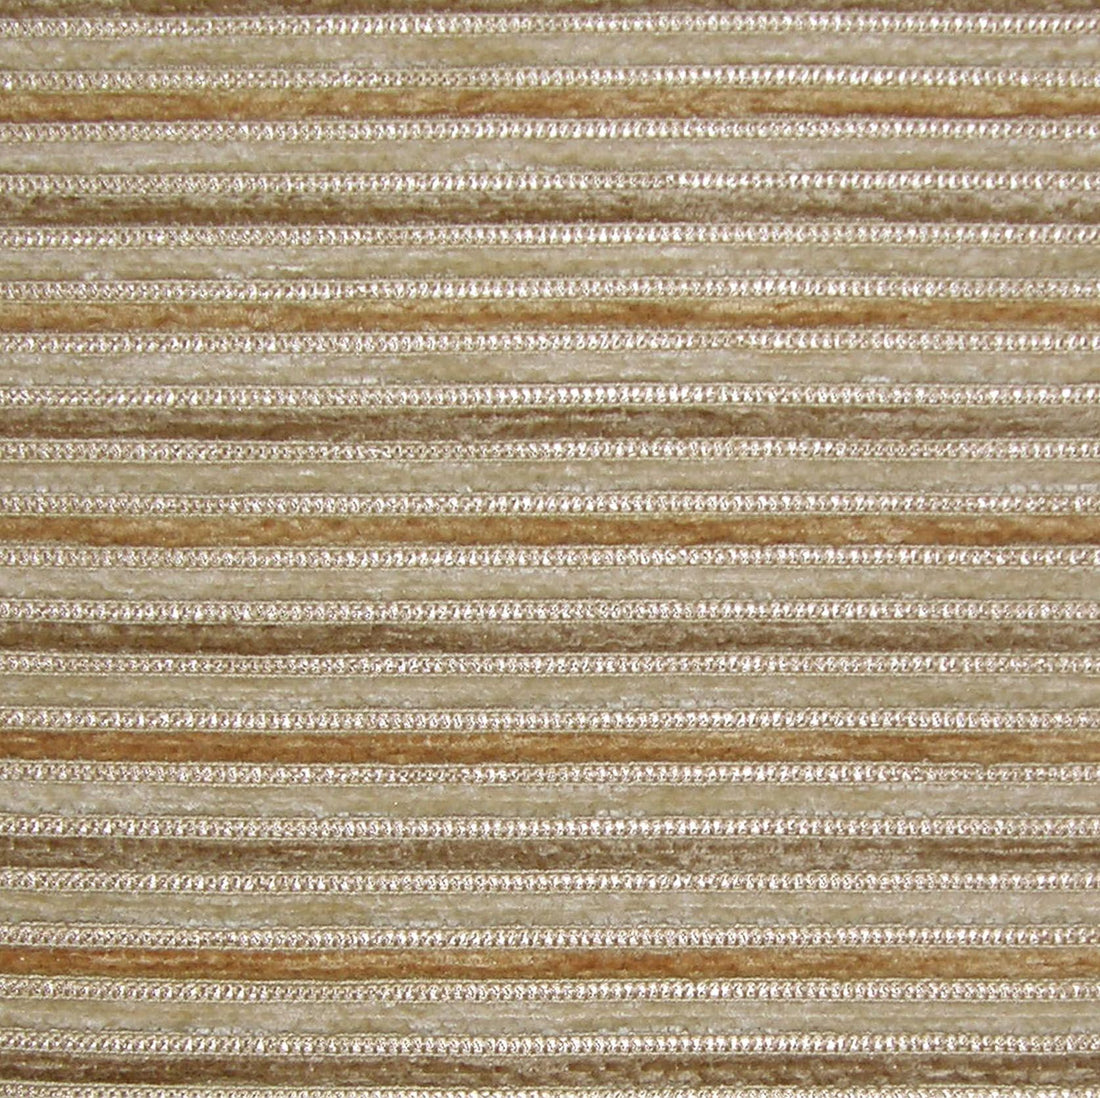 Gilcrest fabric in sand color - pattern number VC 00051106 - by Scalamandre in the Old World Weavers collection